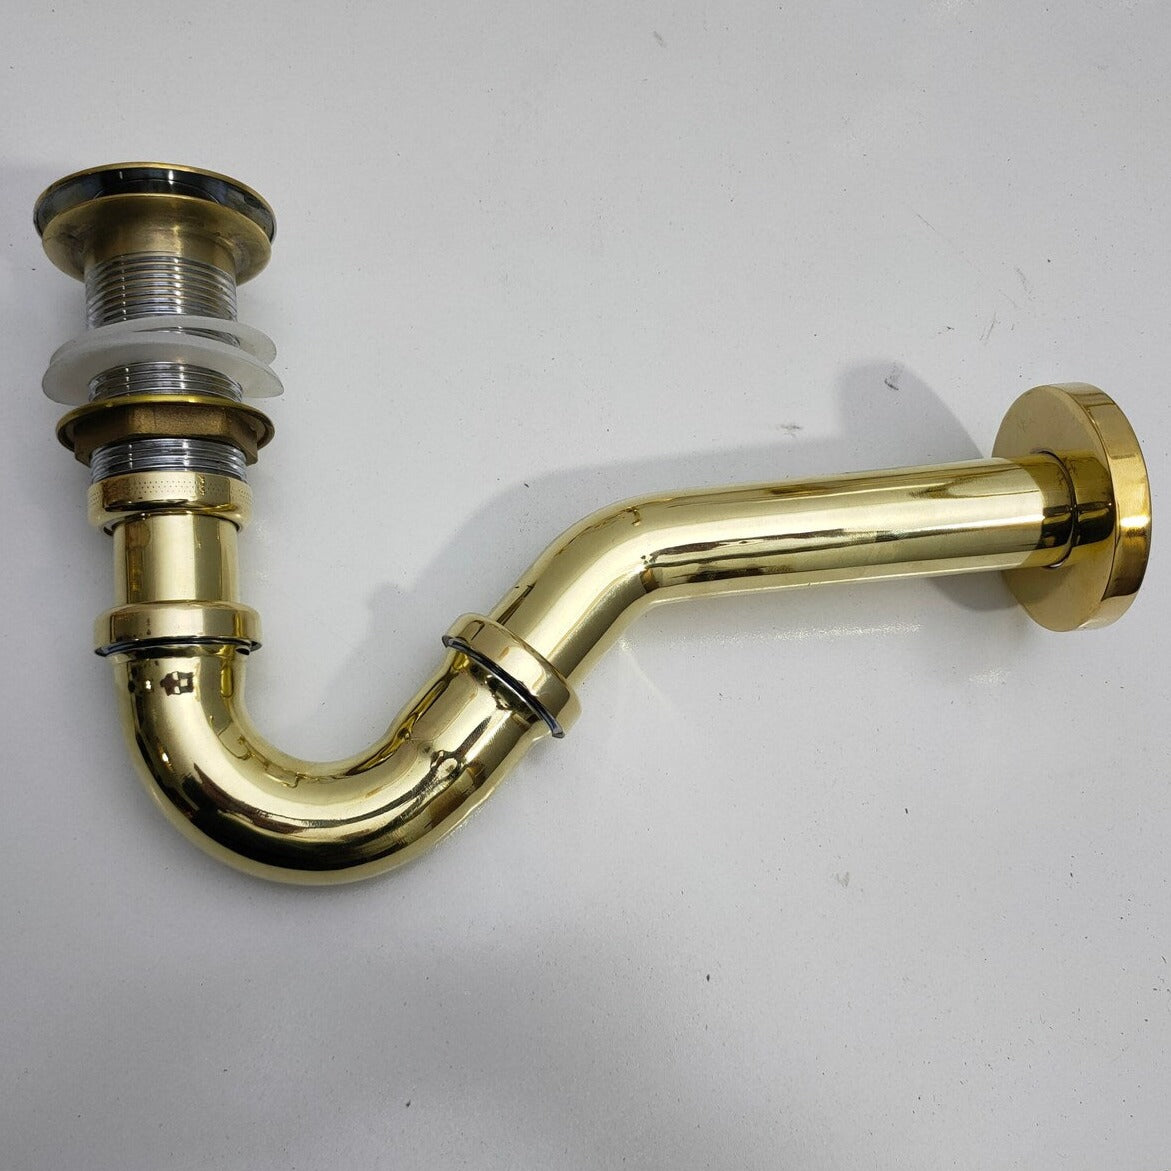 Brass P trap and Push up drain for Vanity Sink - US compliant 